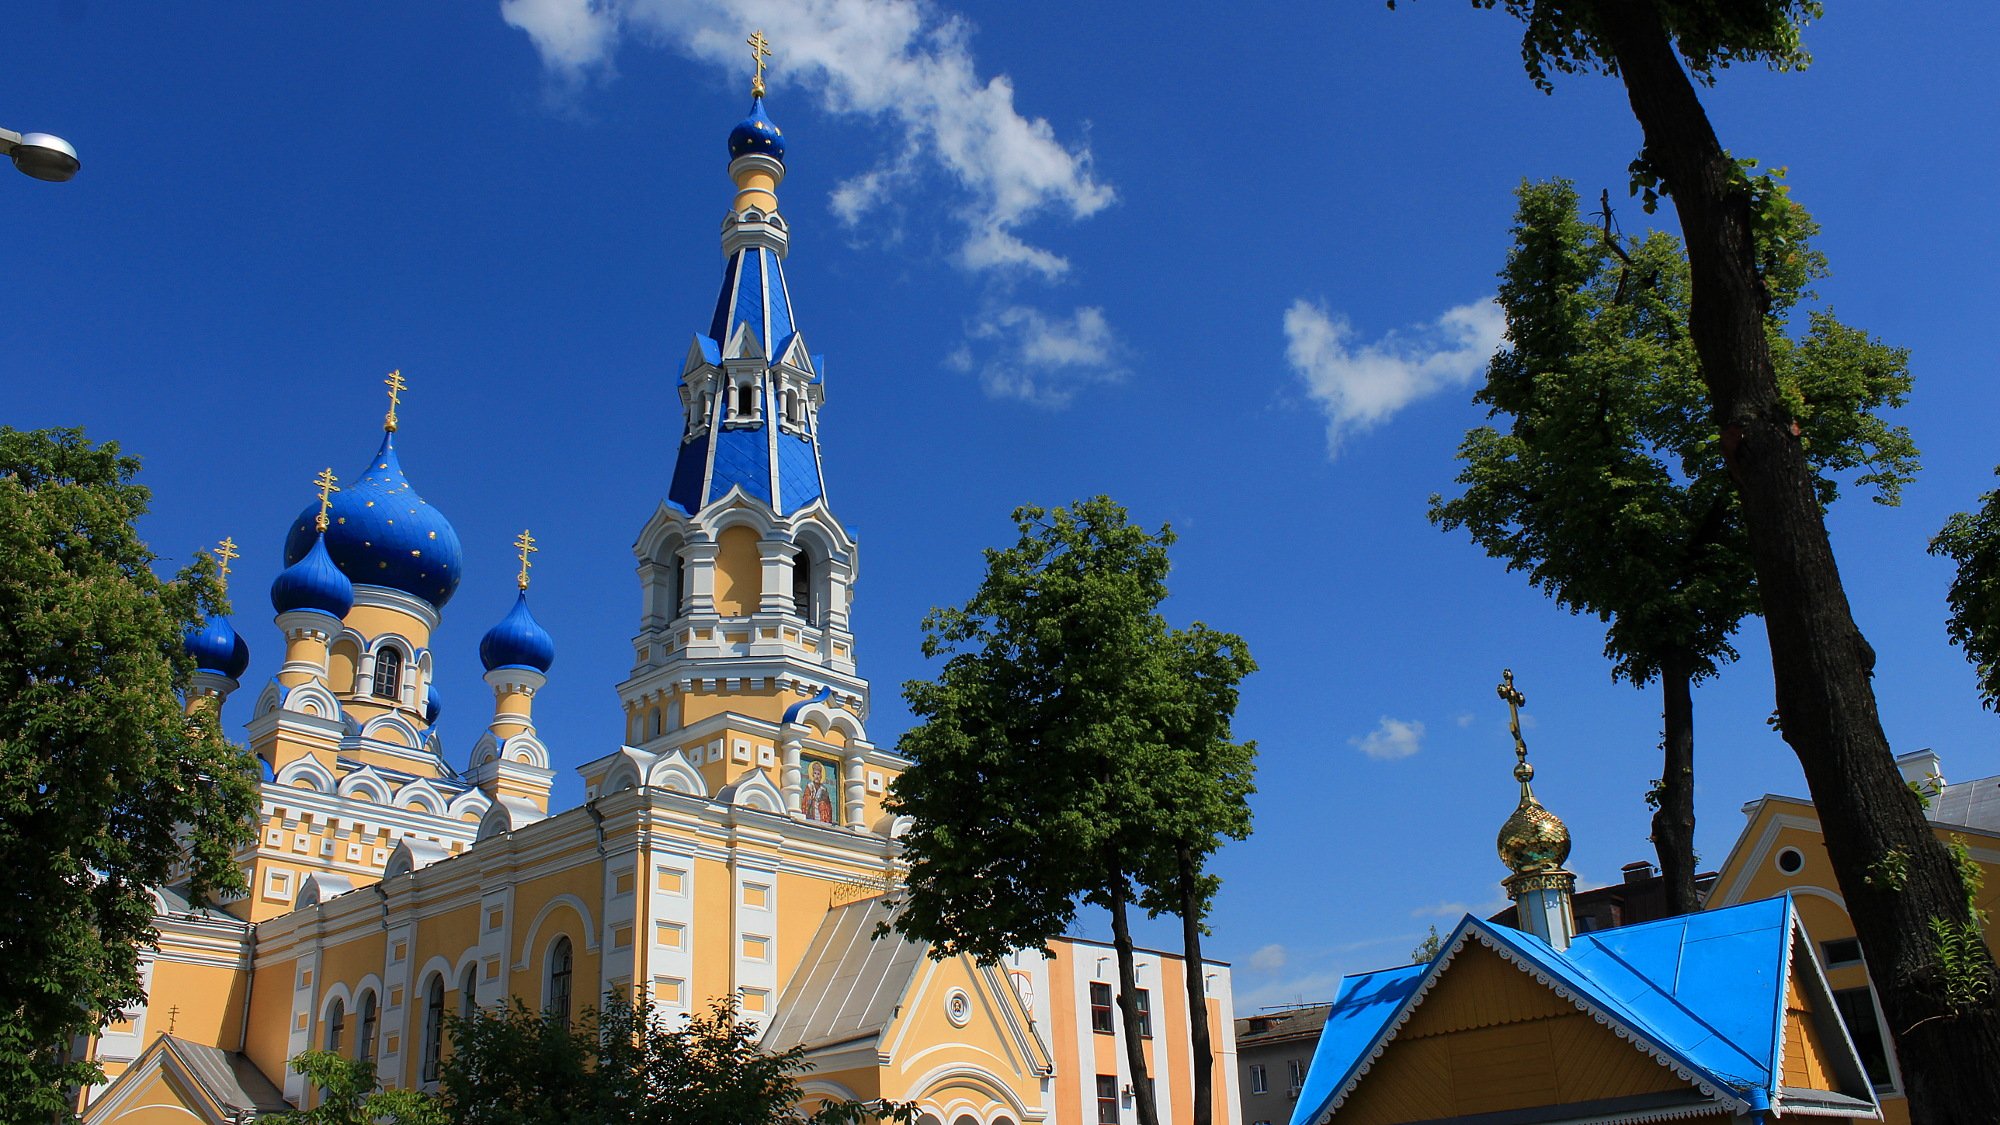 A colorful Orthodox church with yellow walls and blue domes in Brest, Belarus.